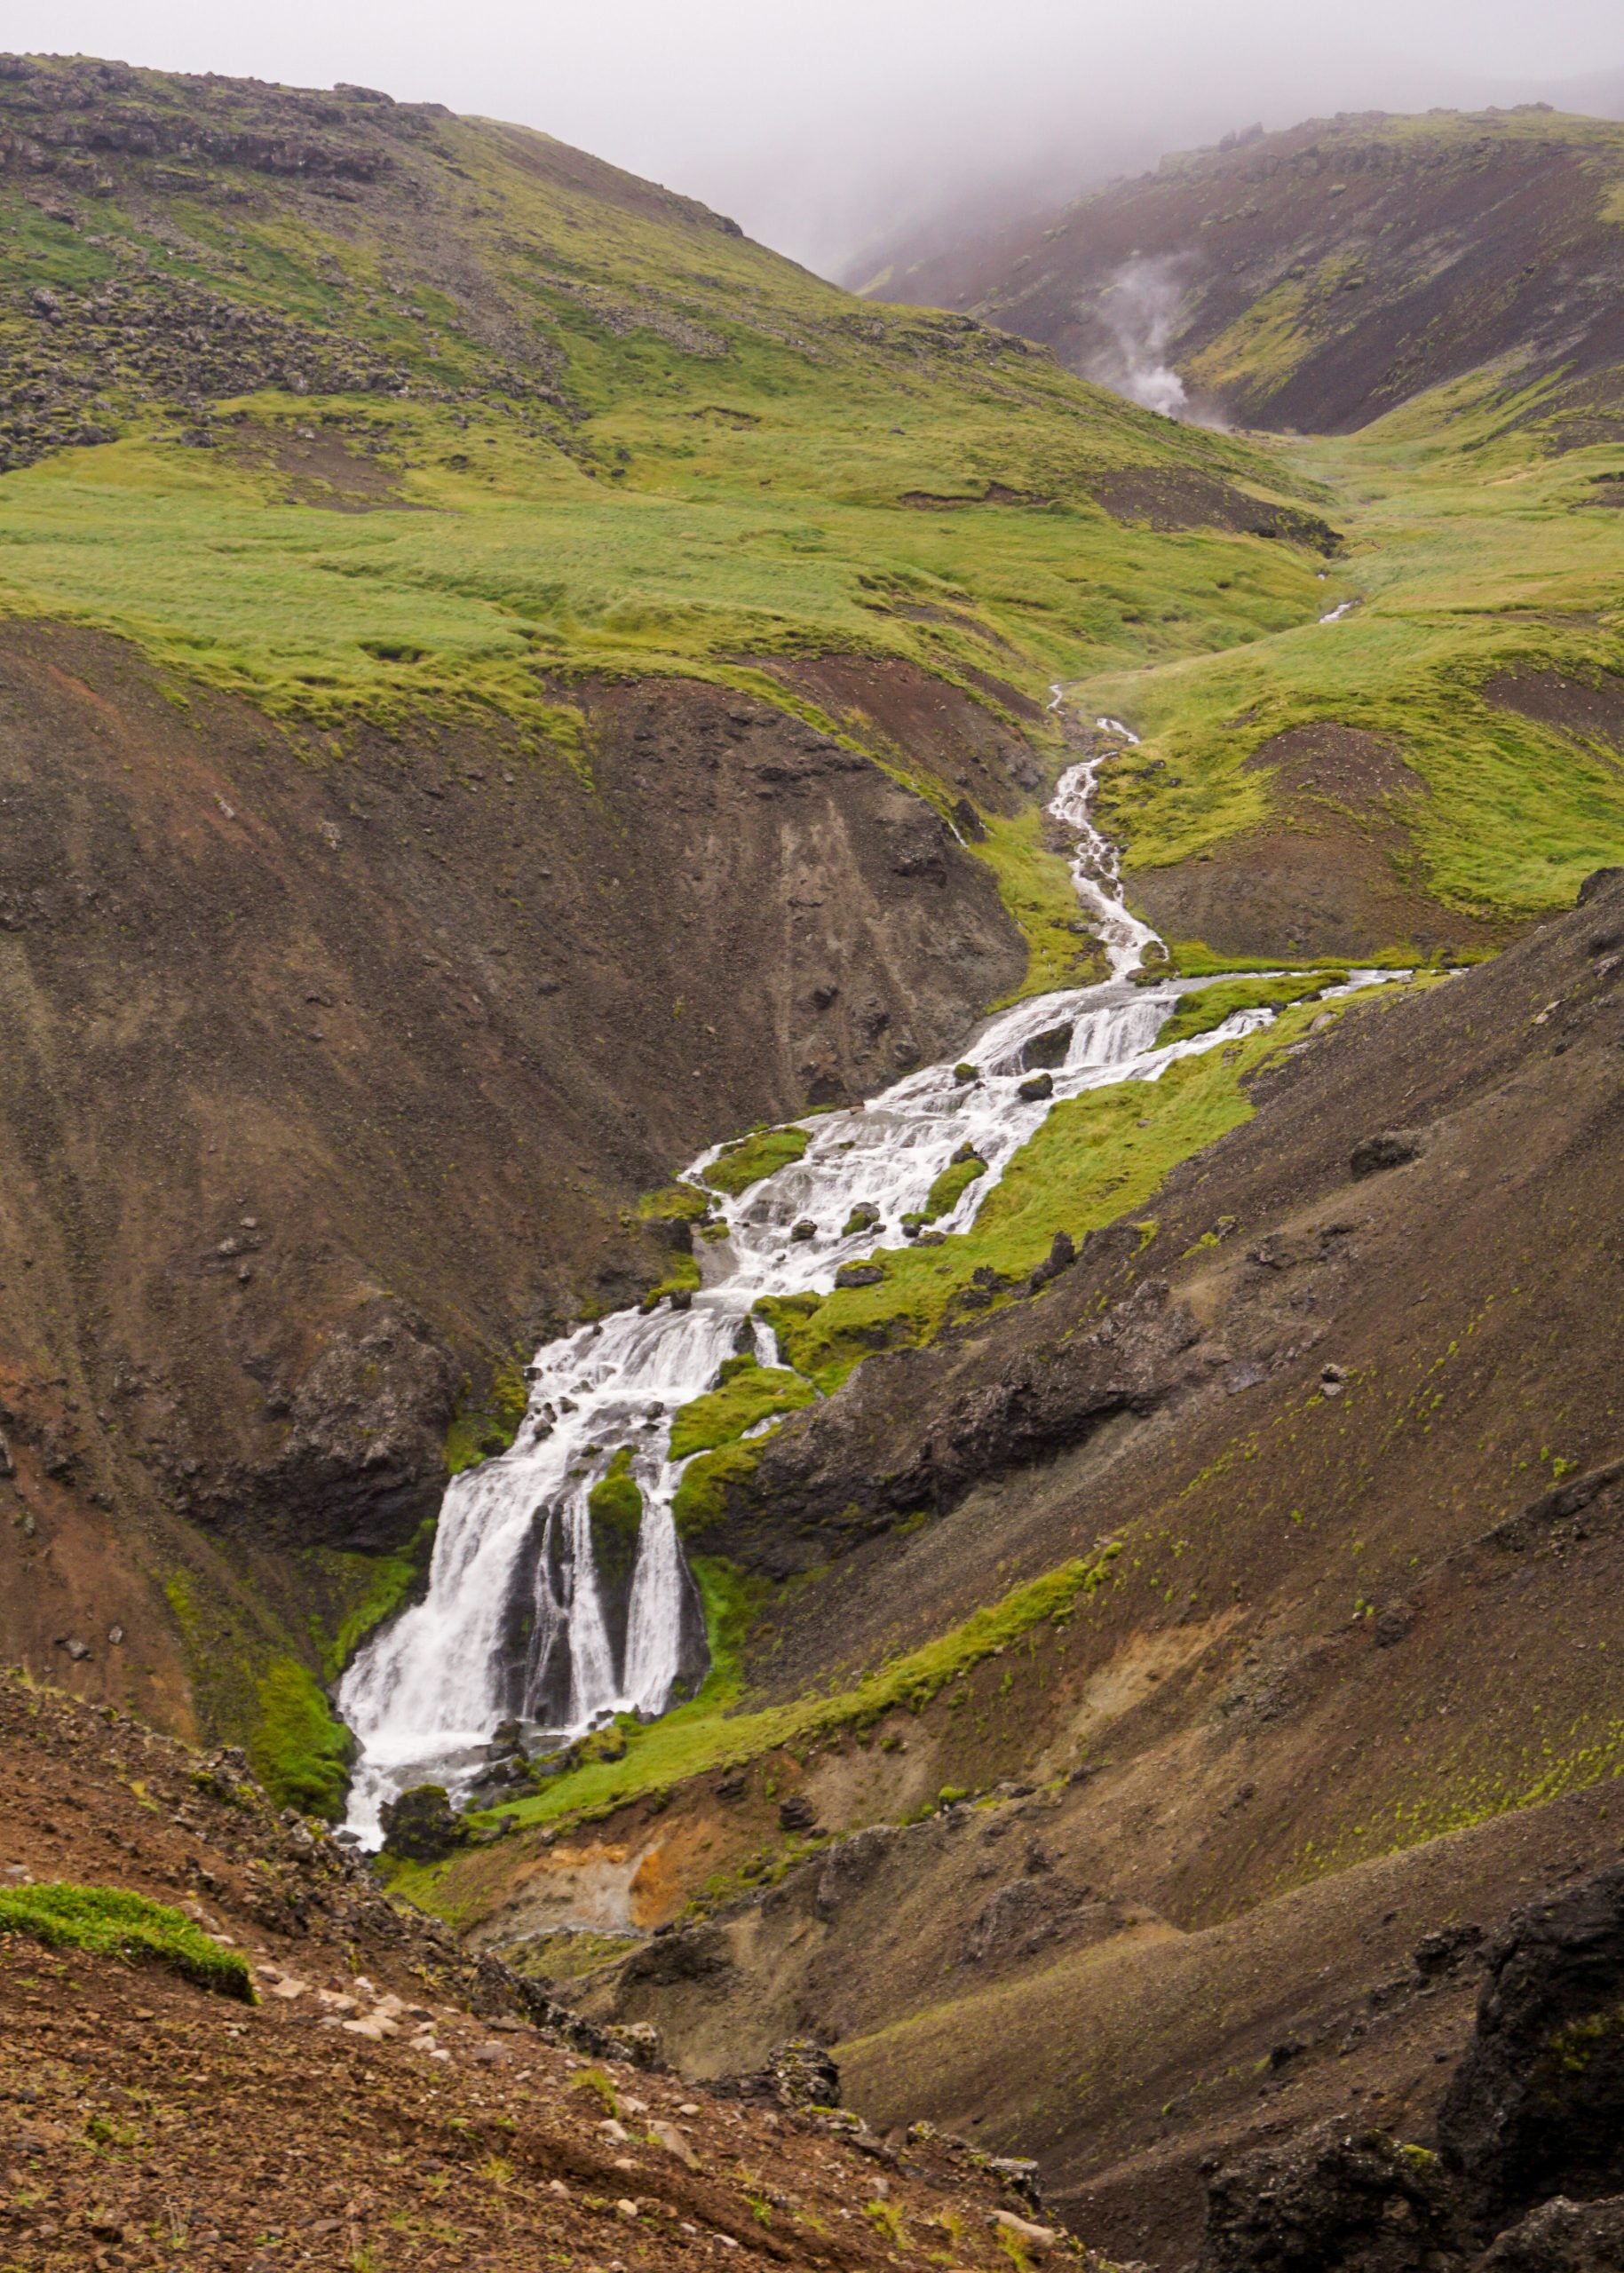 A waterfall from a distance at the Reykjadalur Valley